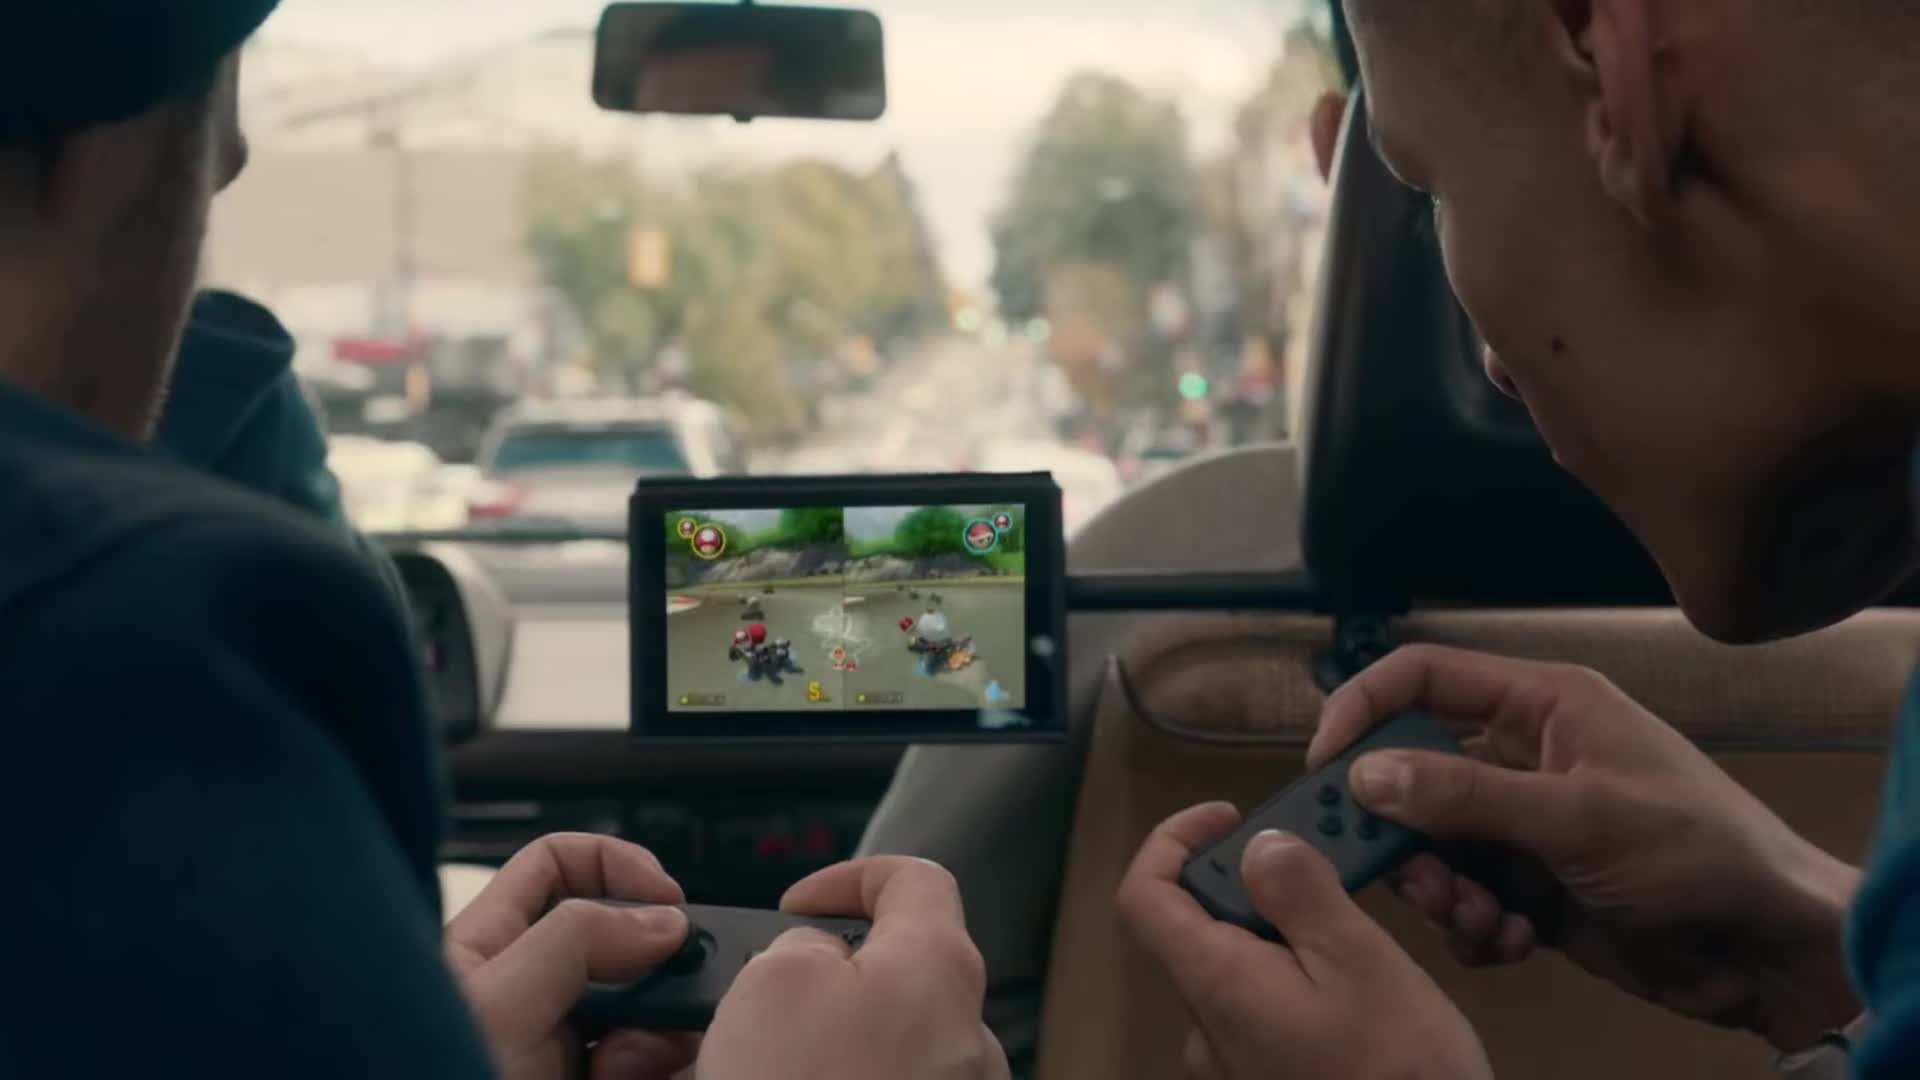 Mario kart eight in the Switch reveal trailer.